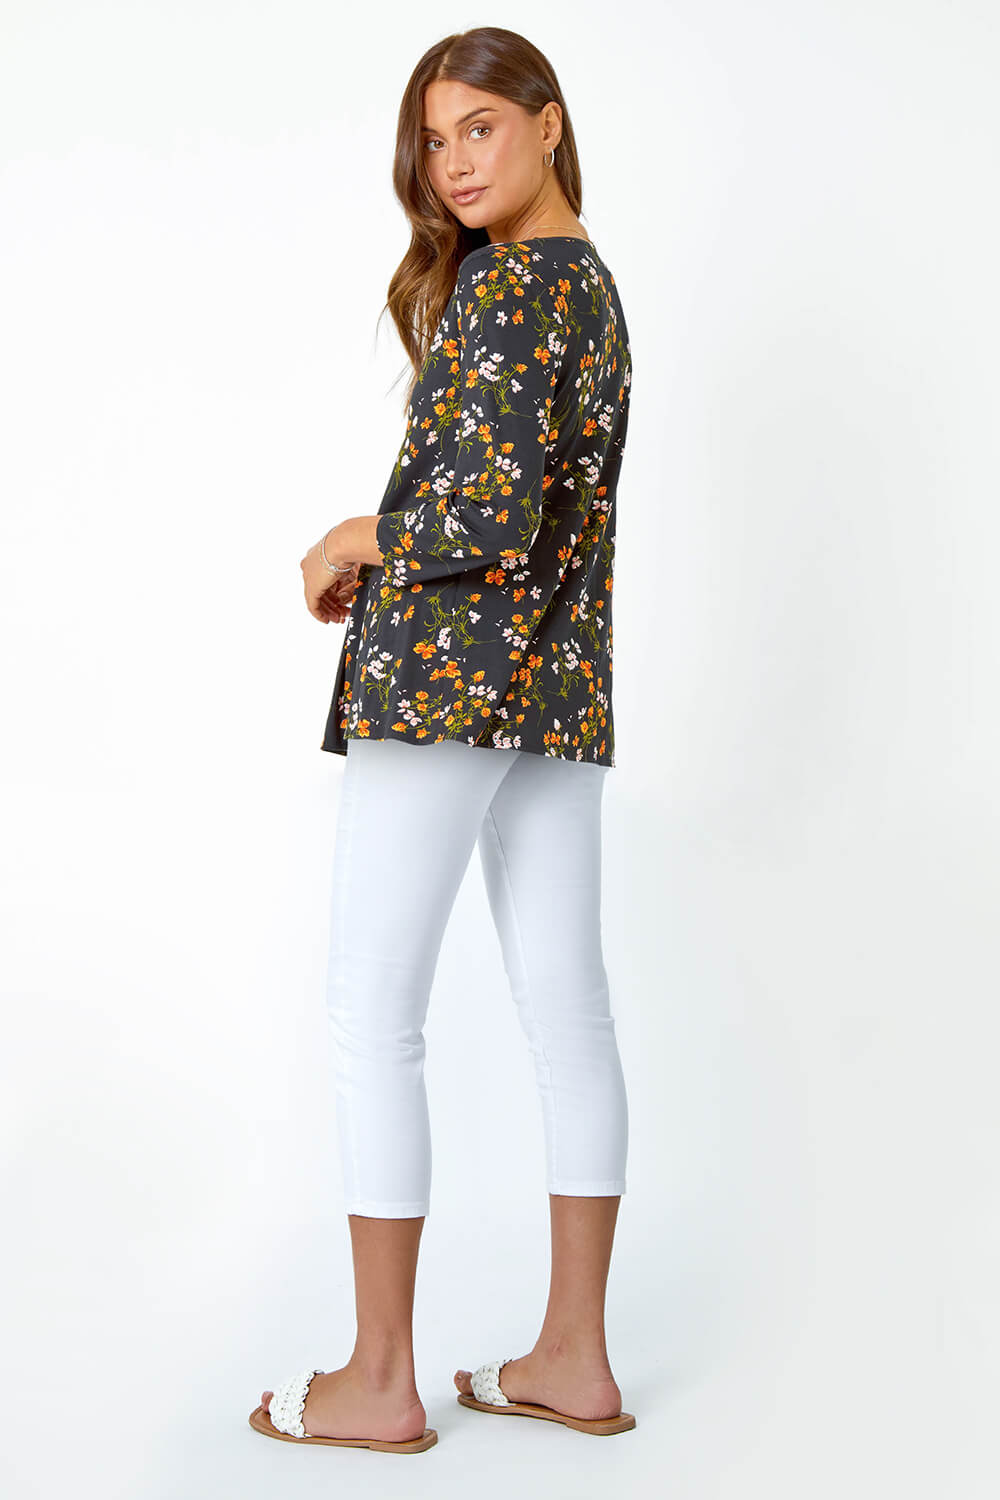 Black Floral Print Swing Stretch Top, Image 3 of 5